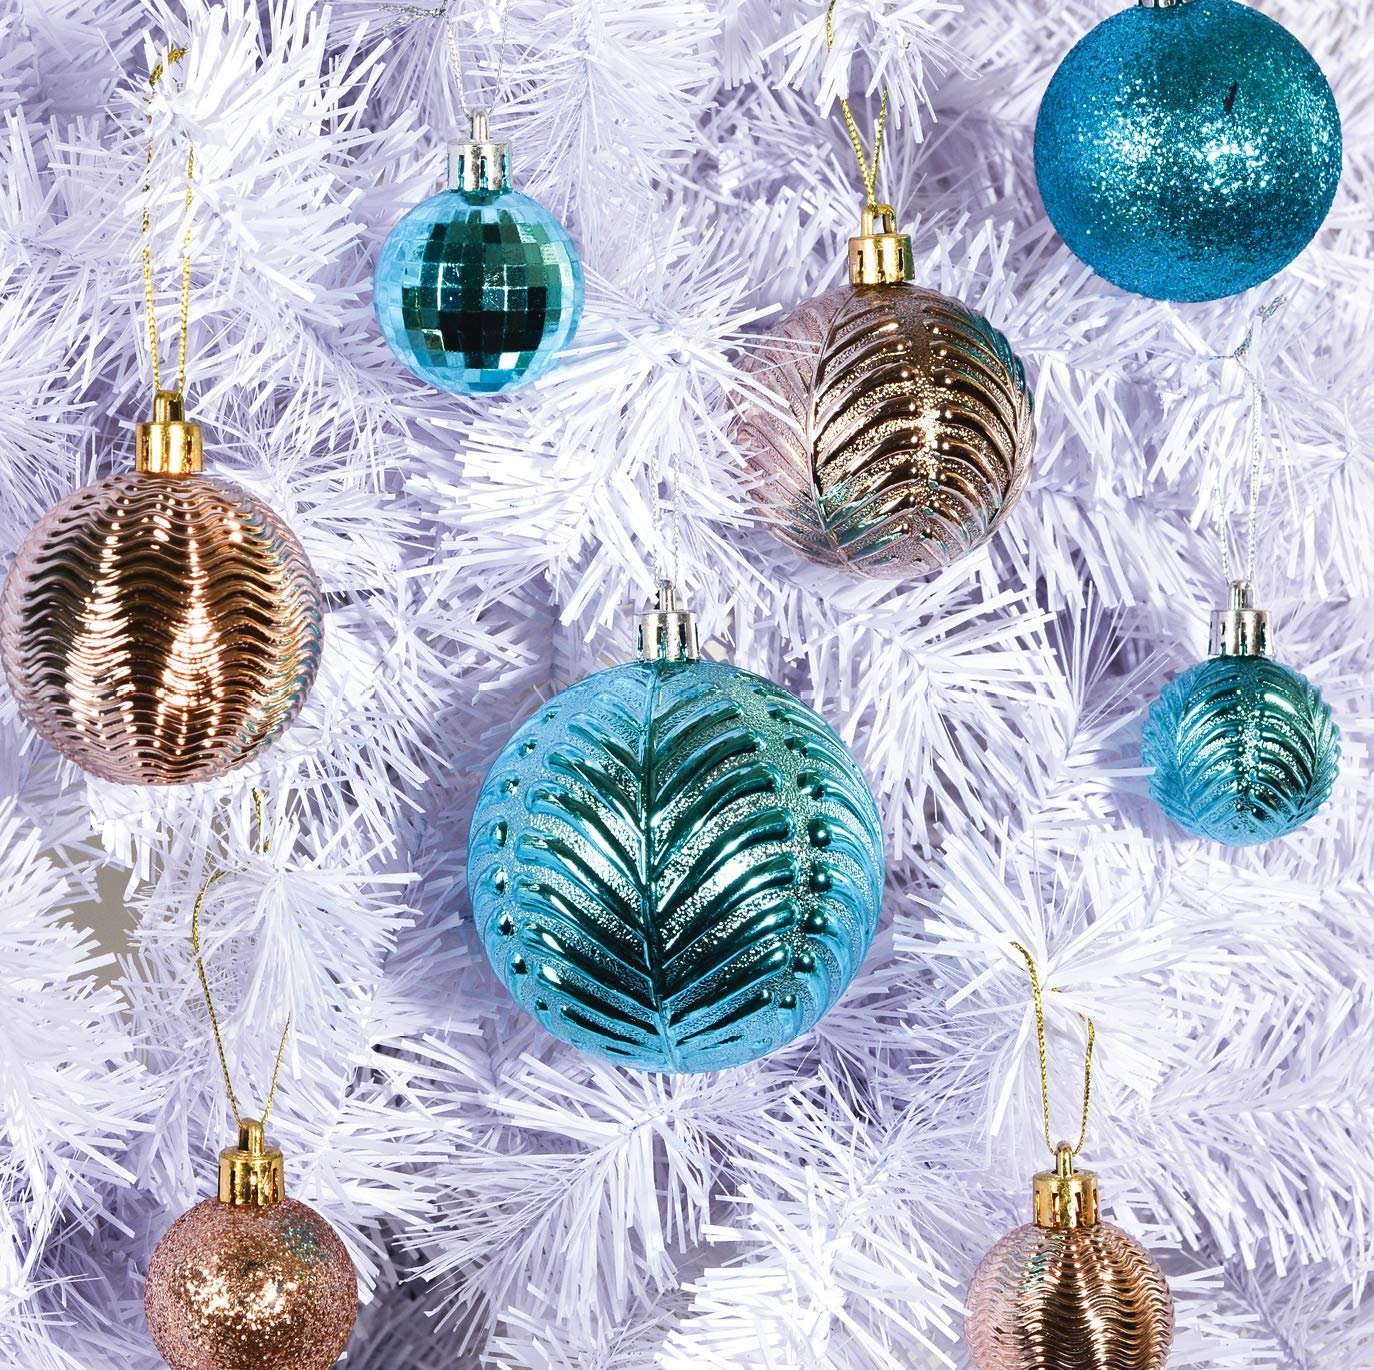 Prextex Acid Blue Christmas Ball Ornaments for Christmas Decorations - 36 Pieces Xmas Tree Shatterproof Ornaments with Hanging Loop for Holiday and Party Decoration (Combo of 6 Styles in 3 Sizes)